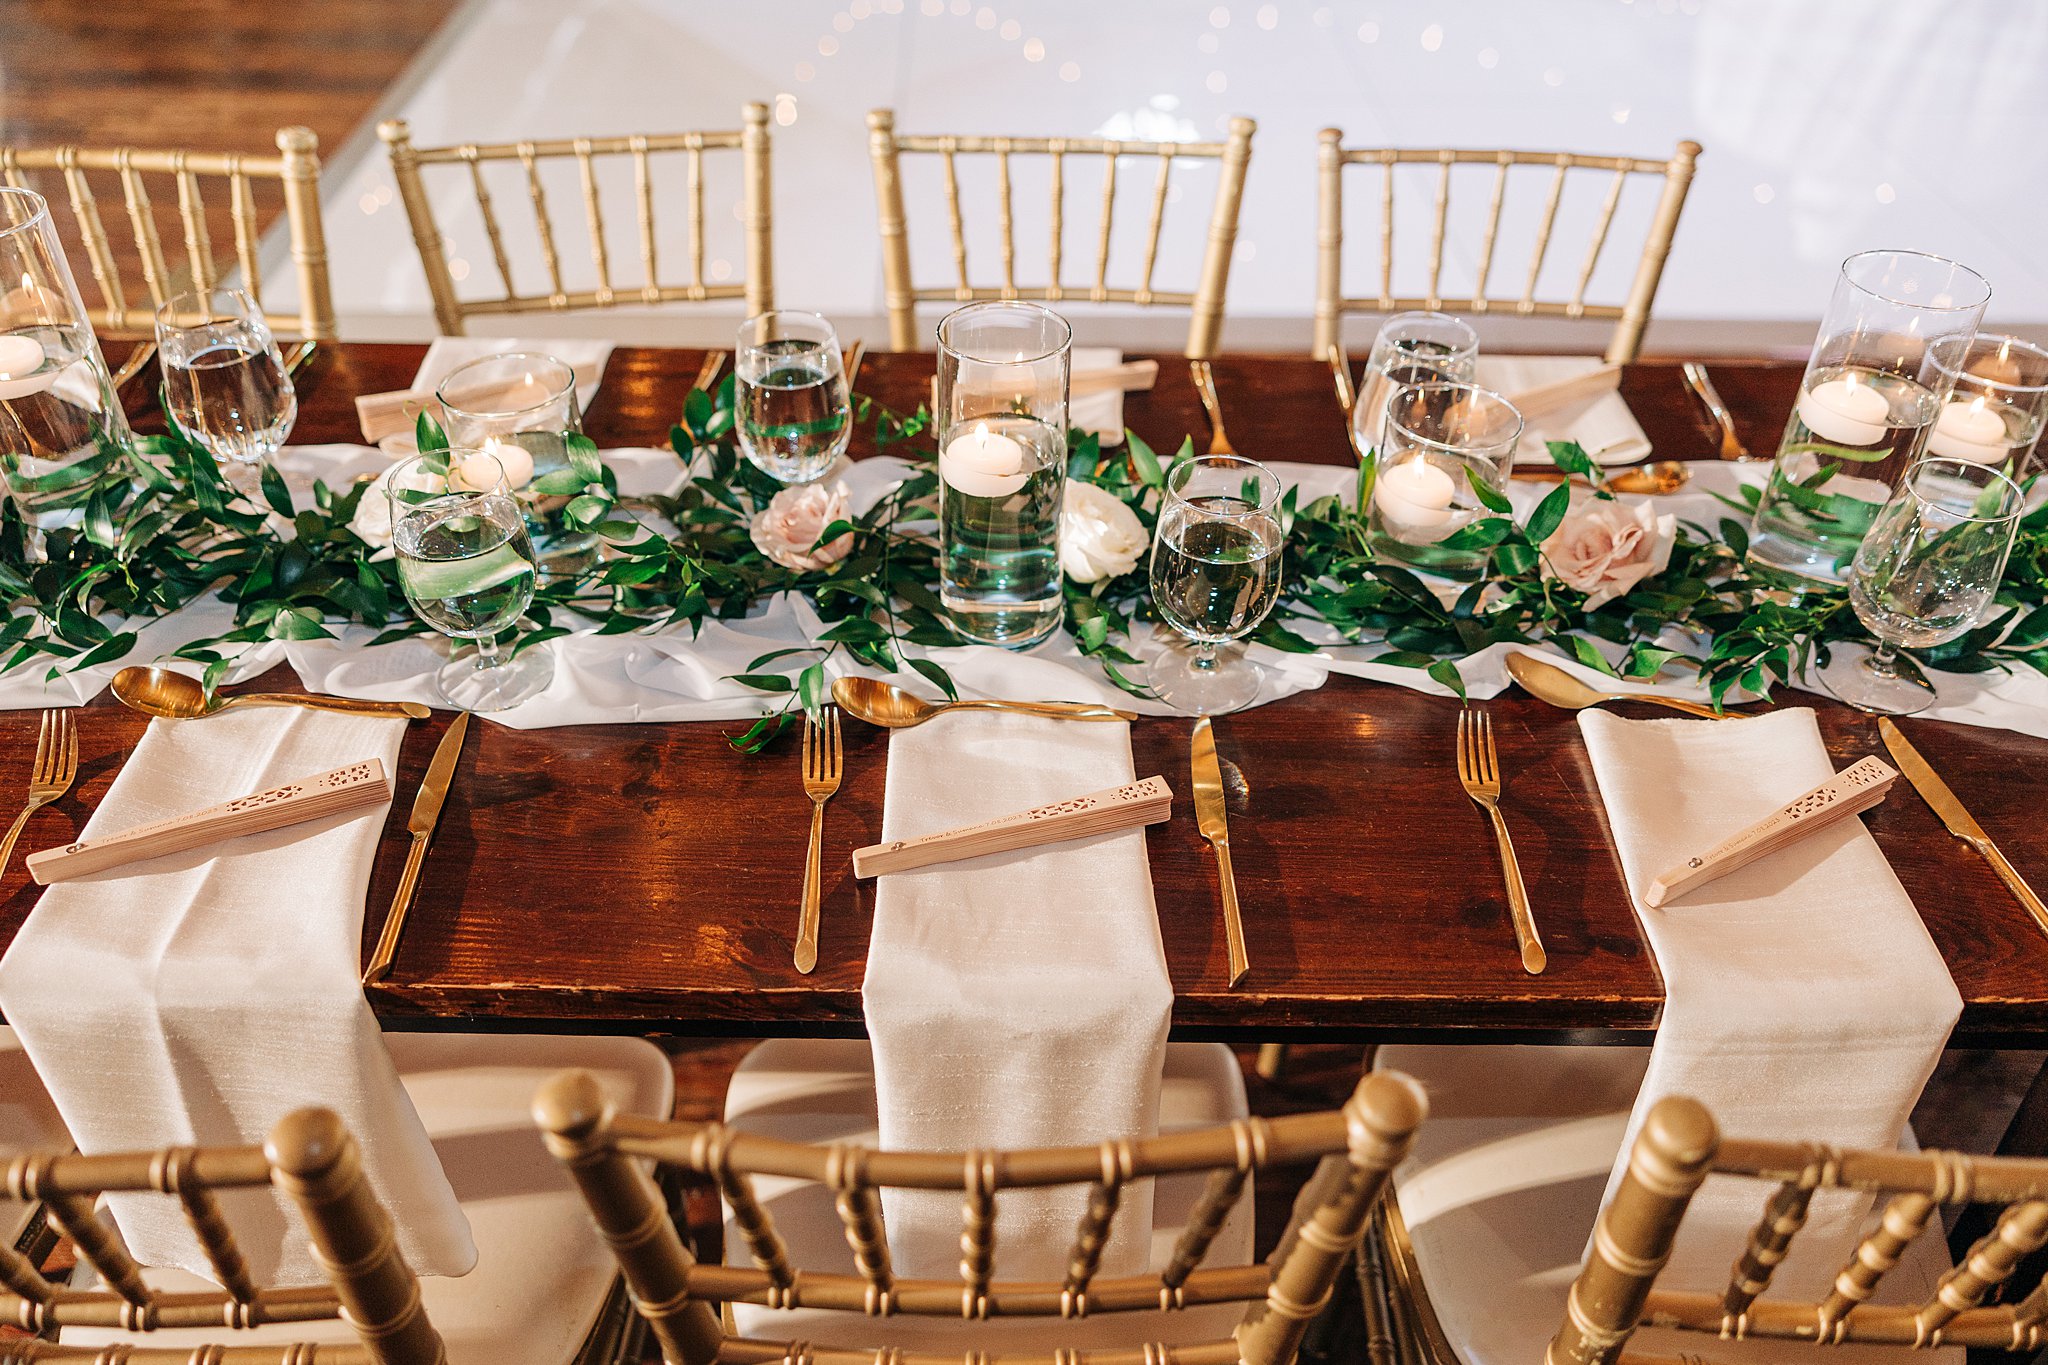 Details of a wooden wedding reception table set up with fans at each setting